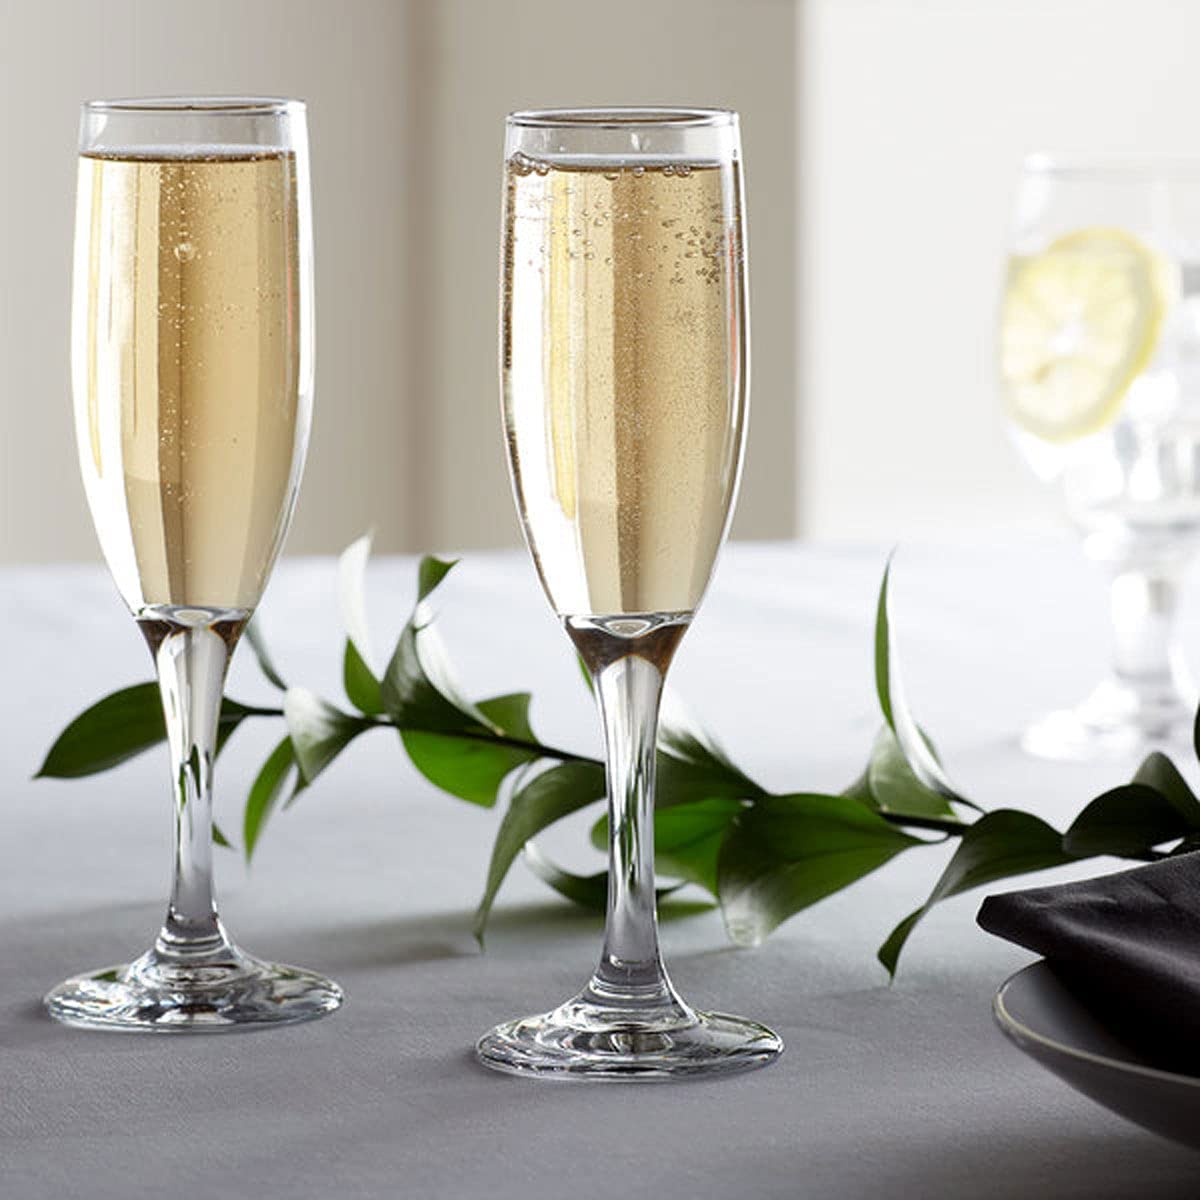 GIFTS INFINITY Engraved Wedding Interlock Hearts Champagne Flutes Set of 2 Personalized Toasting Glasses (Interlock Heart)